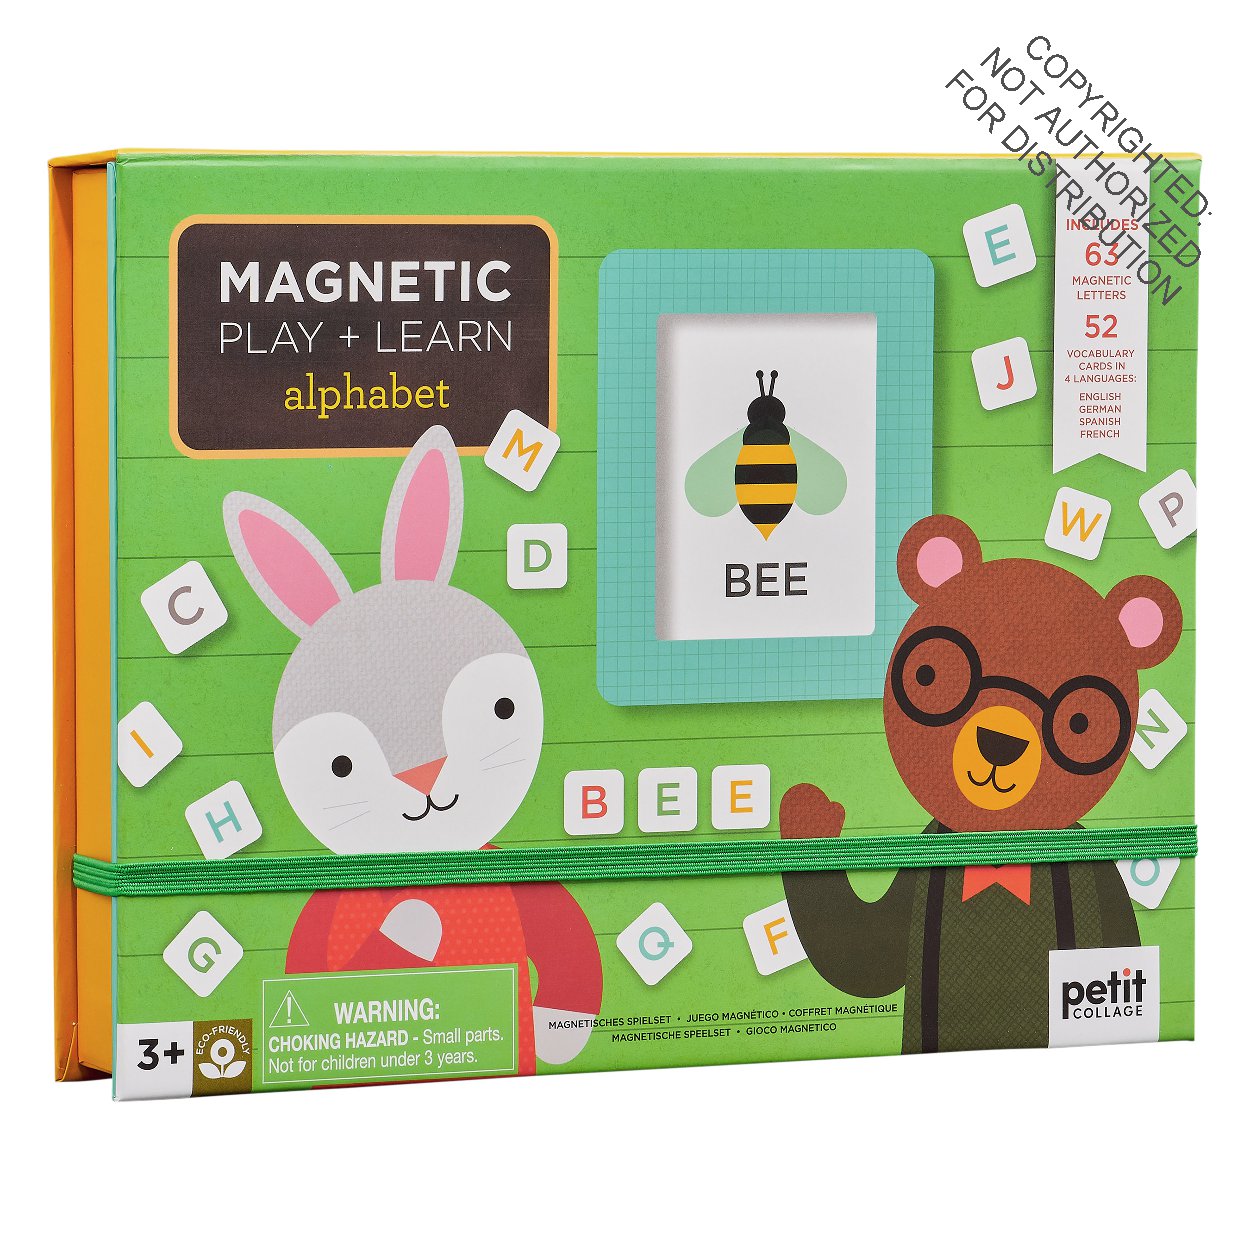 Alphabet Magnetic Play + Learn